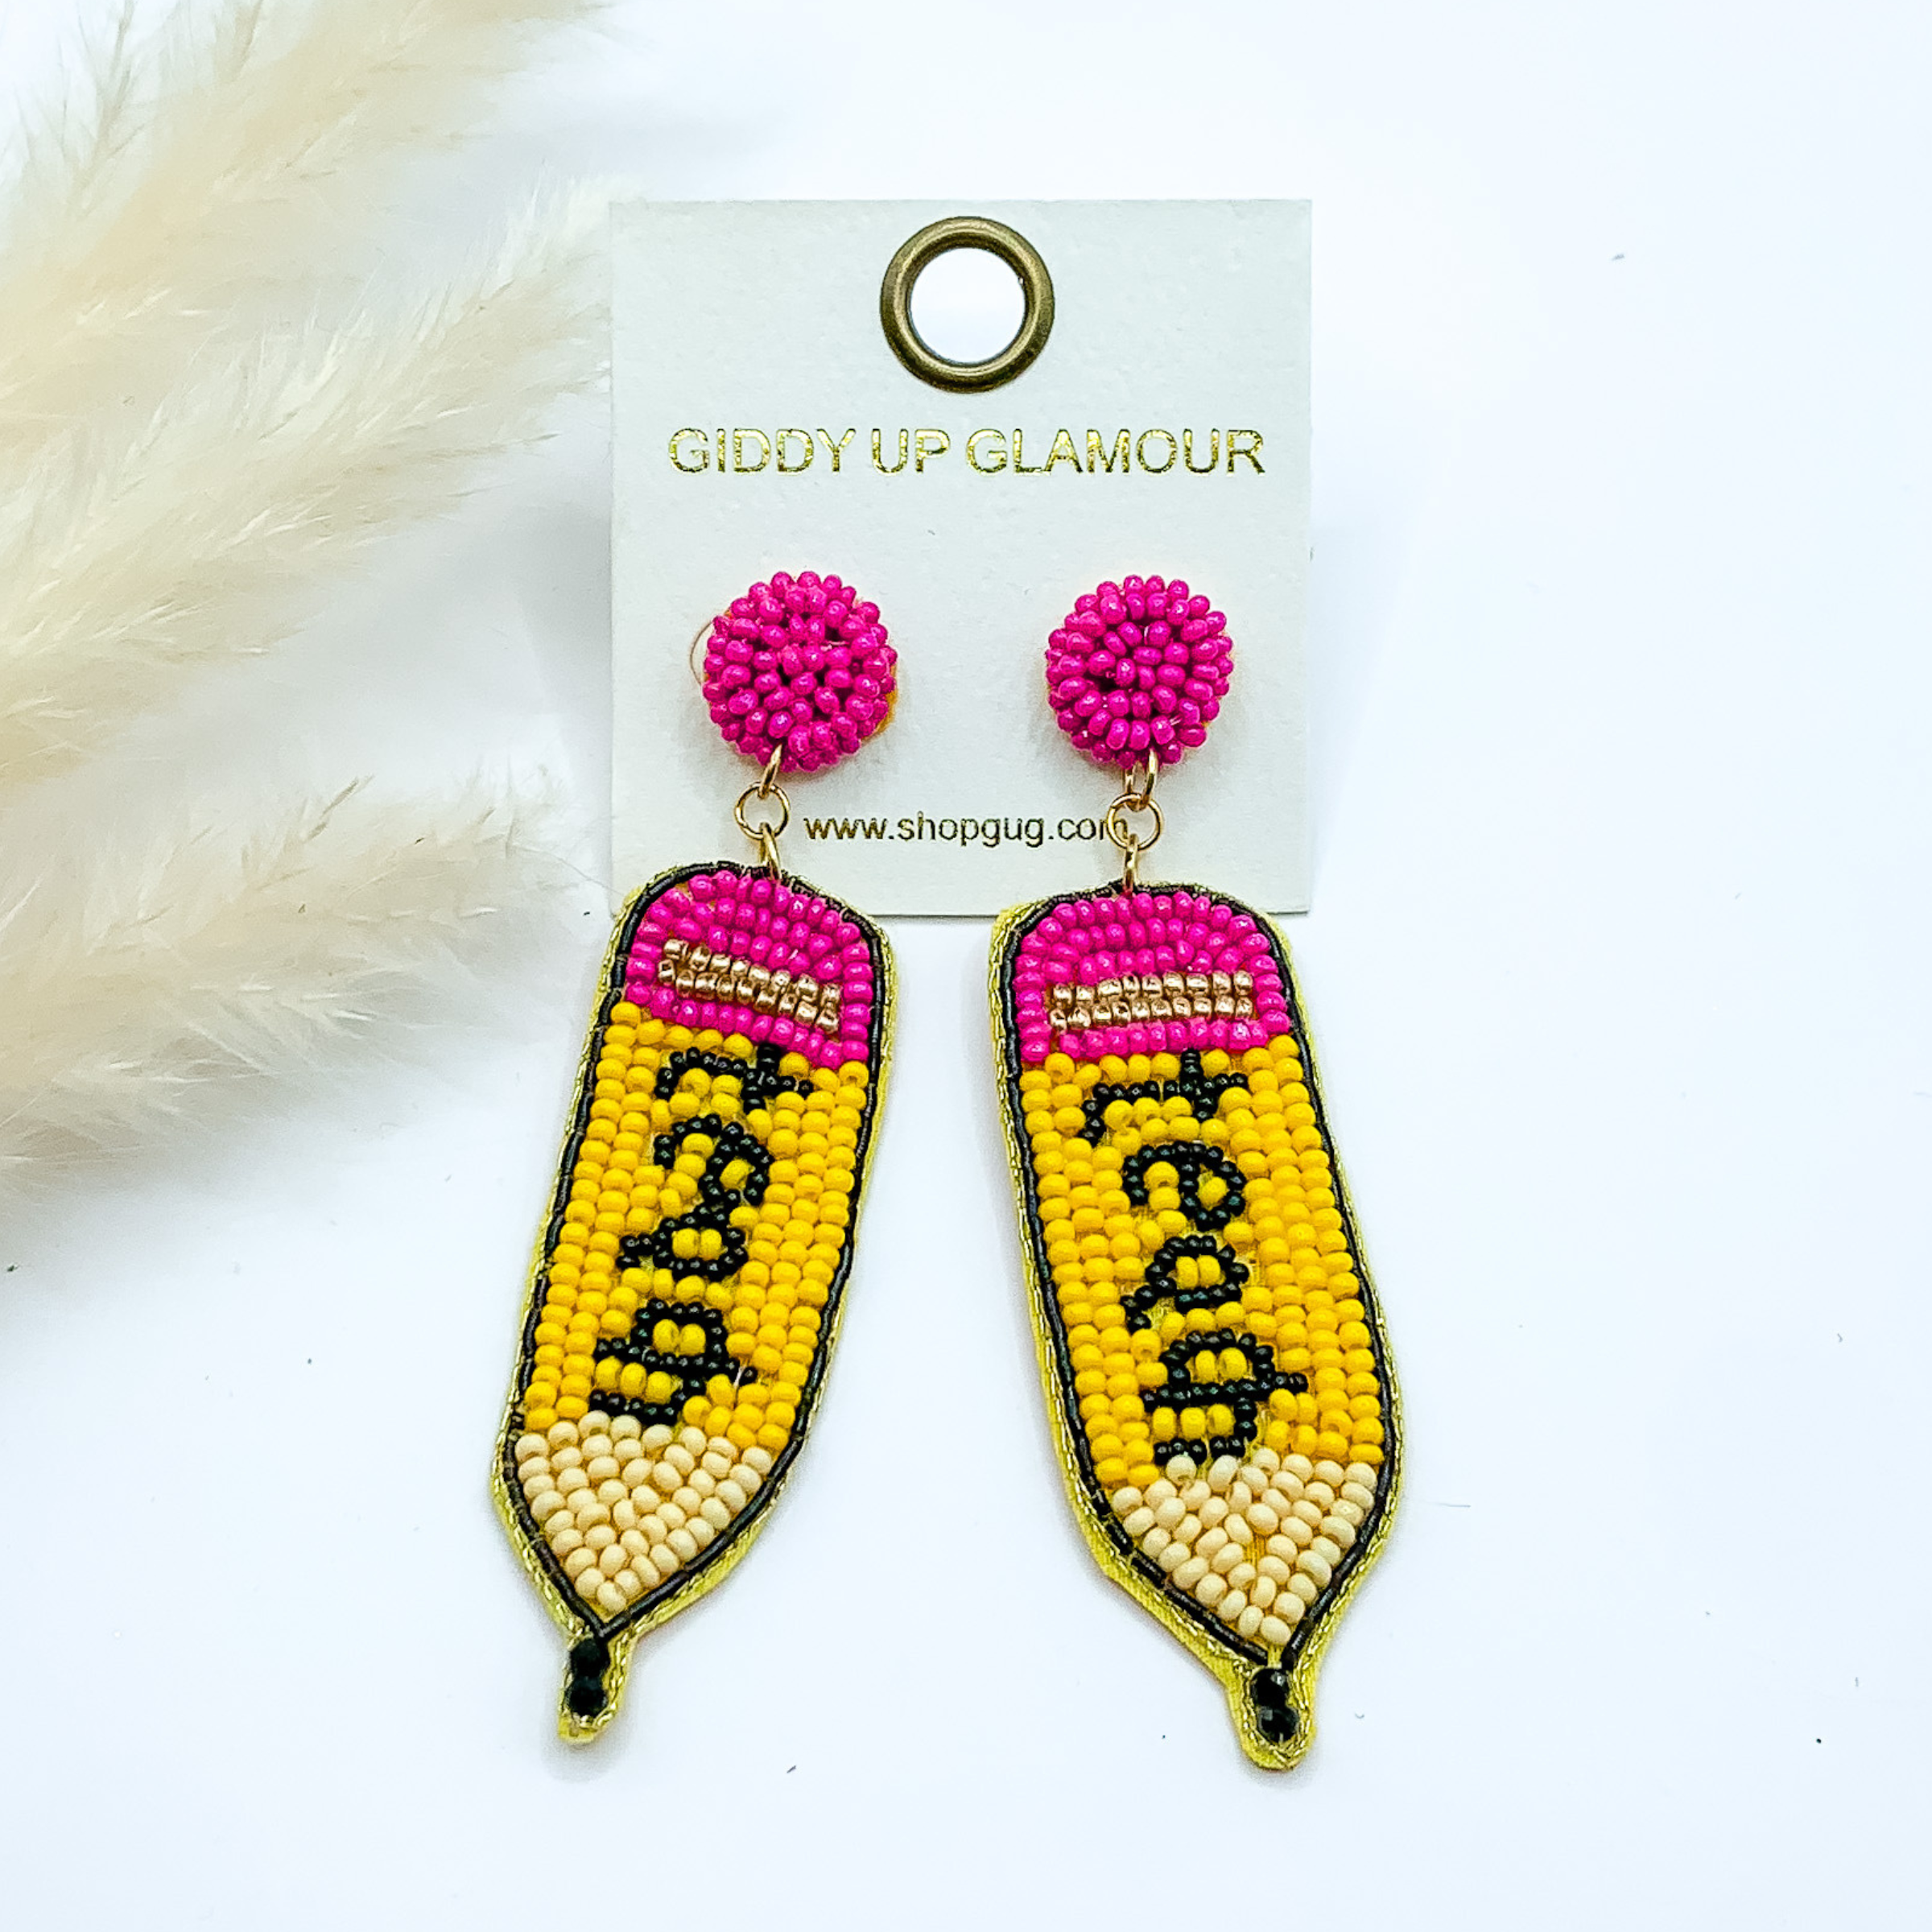 Pink beaded circle post earrings with a beaded pencil pendant. This pendant includes the colors of a pencil and the word "teach" is spelled out in black beads. These earrings are pictured on a white background. 